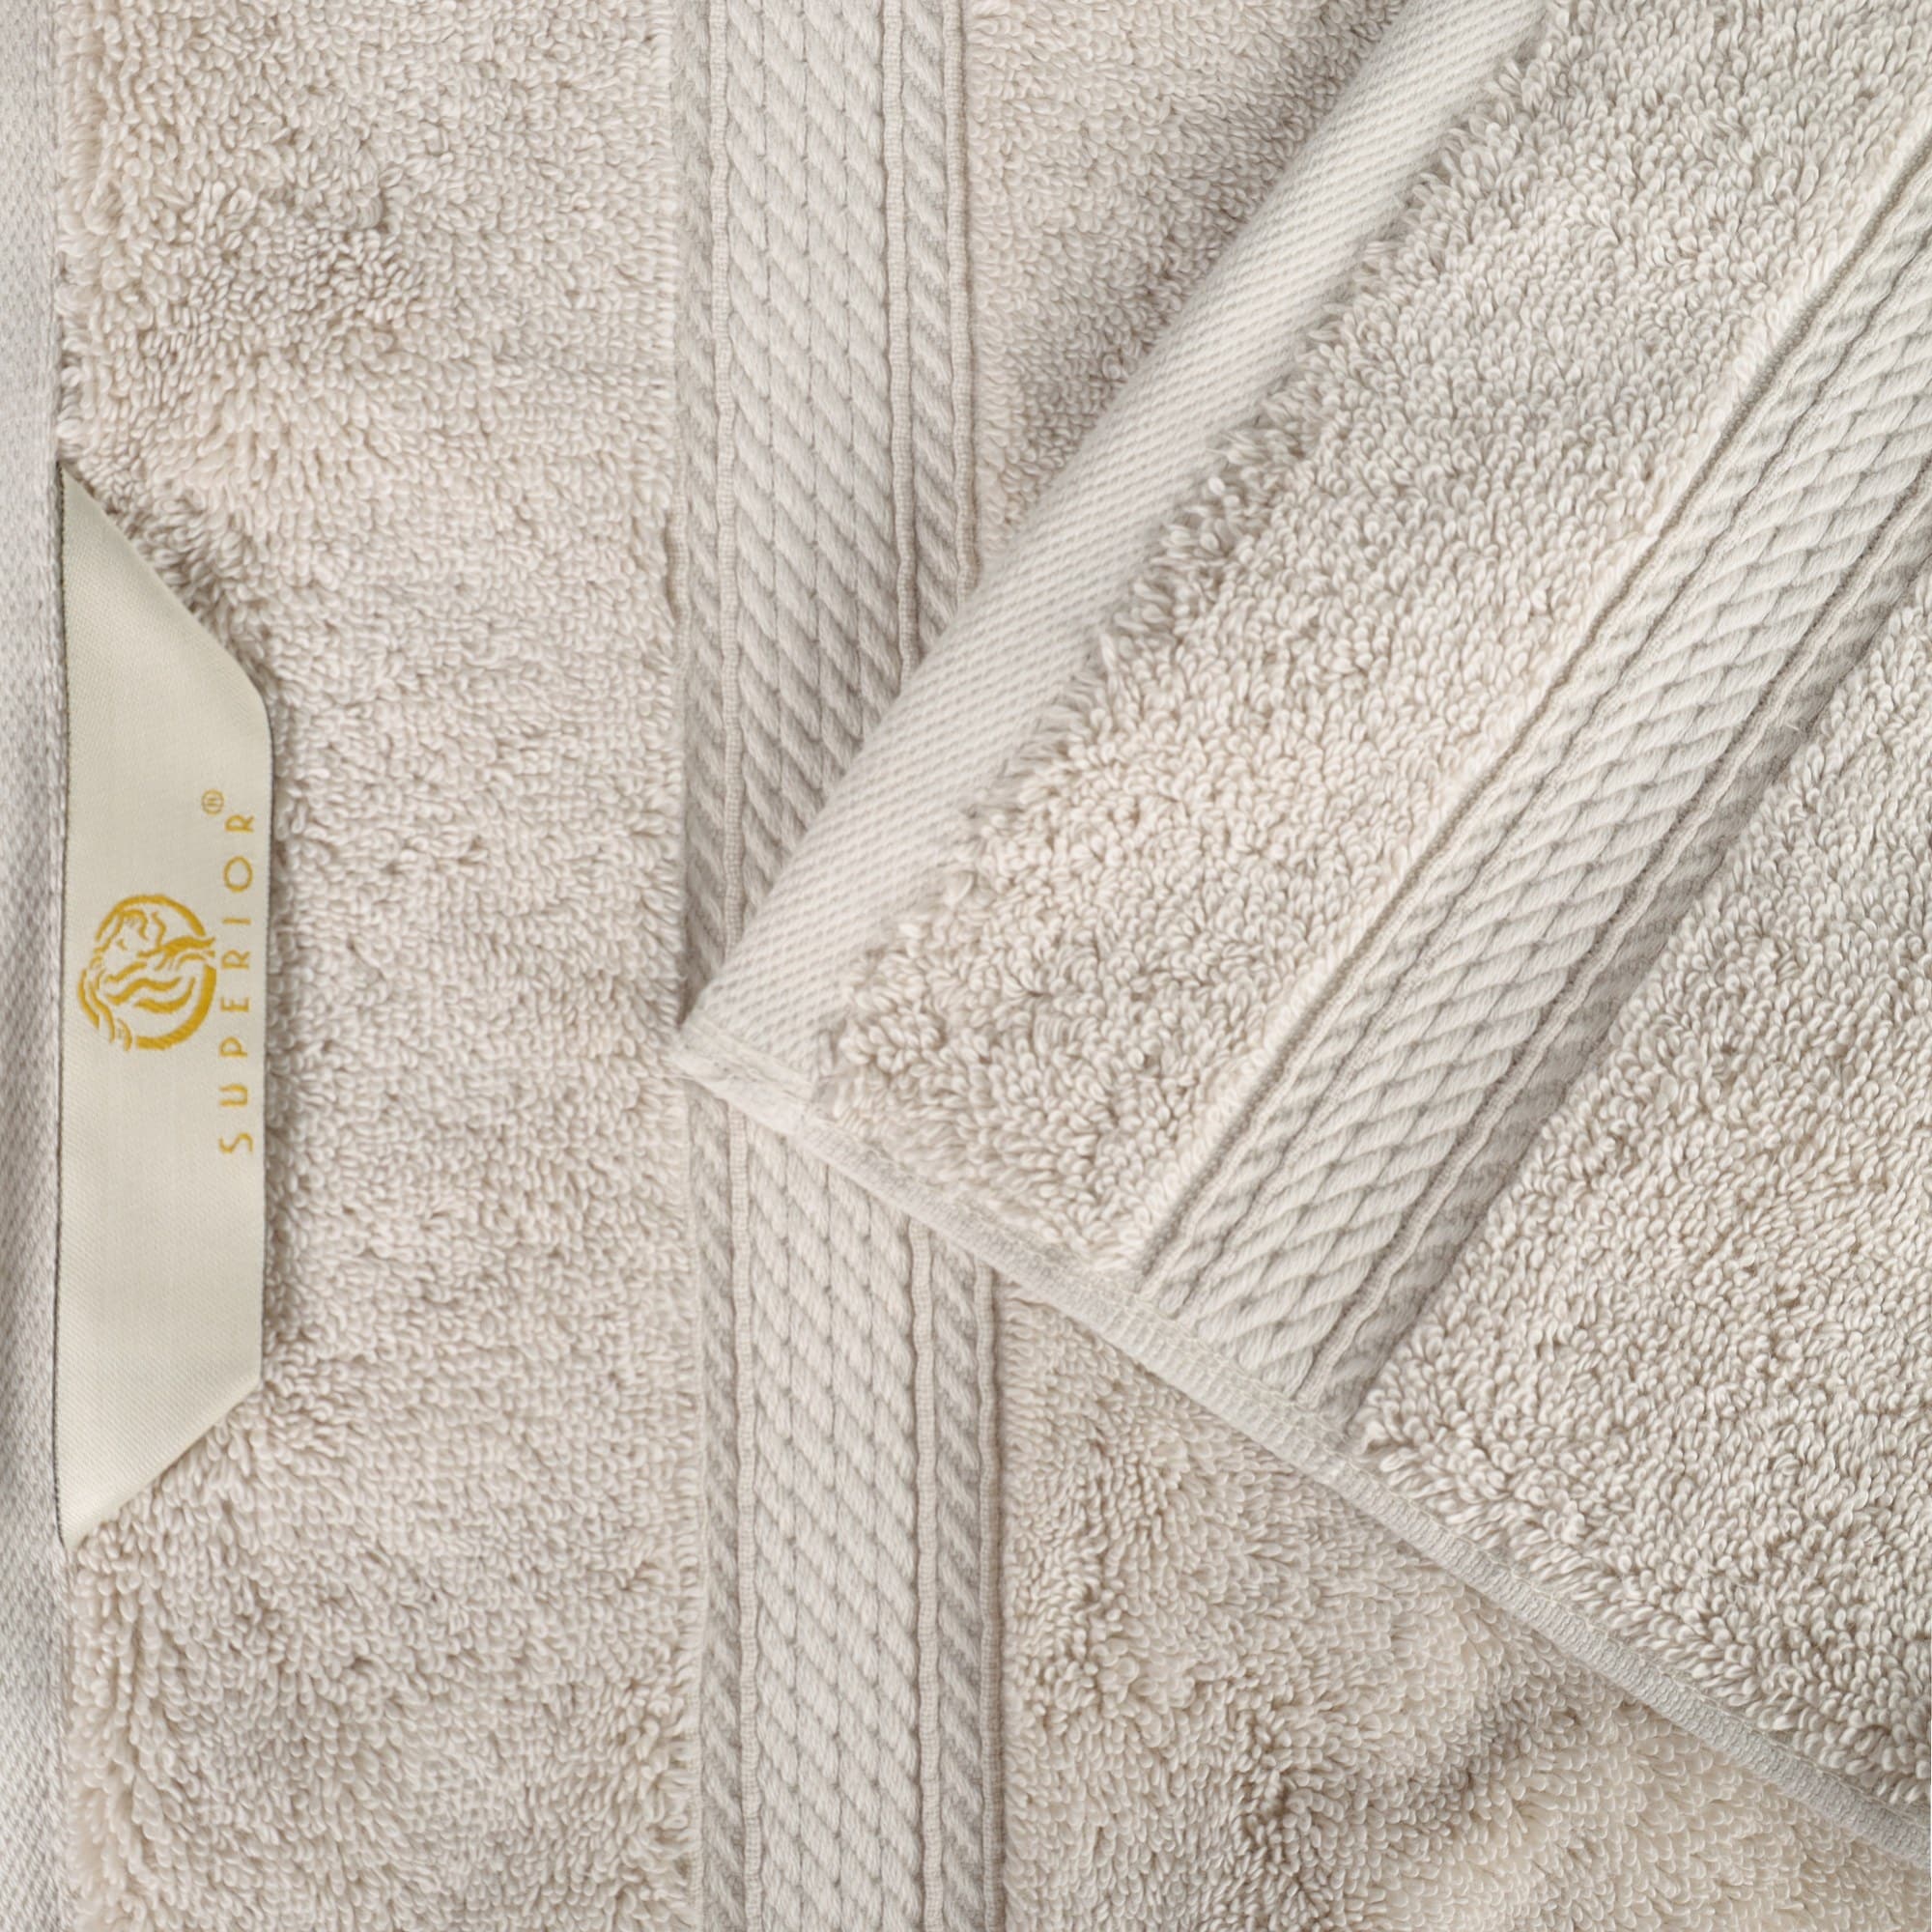 https://ak1.ostkcdn.com/images/products/is/images/direct/9b3f17750dea274db186752c7cf84f2f08a34fc6/Superior-Madison-Egyptian-Cotton-Heavyweight-Luxury-9-Piece-Towel-Set.jpg